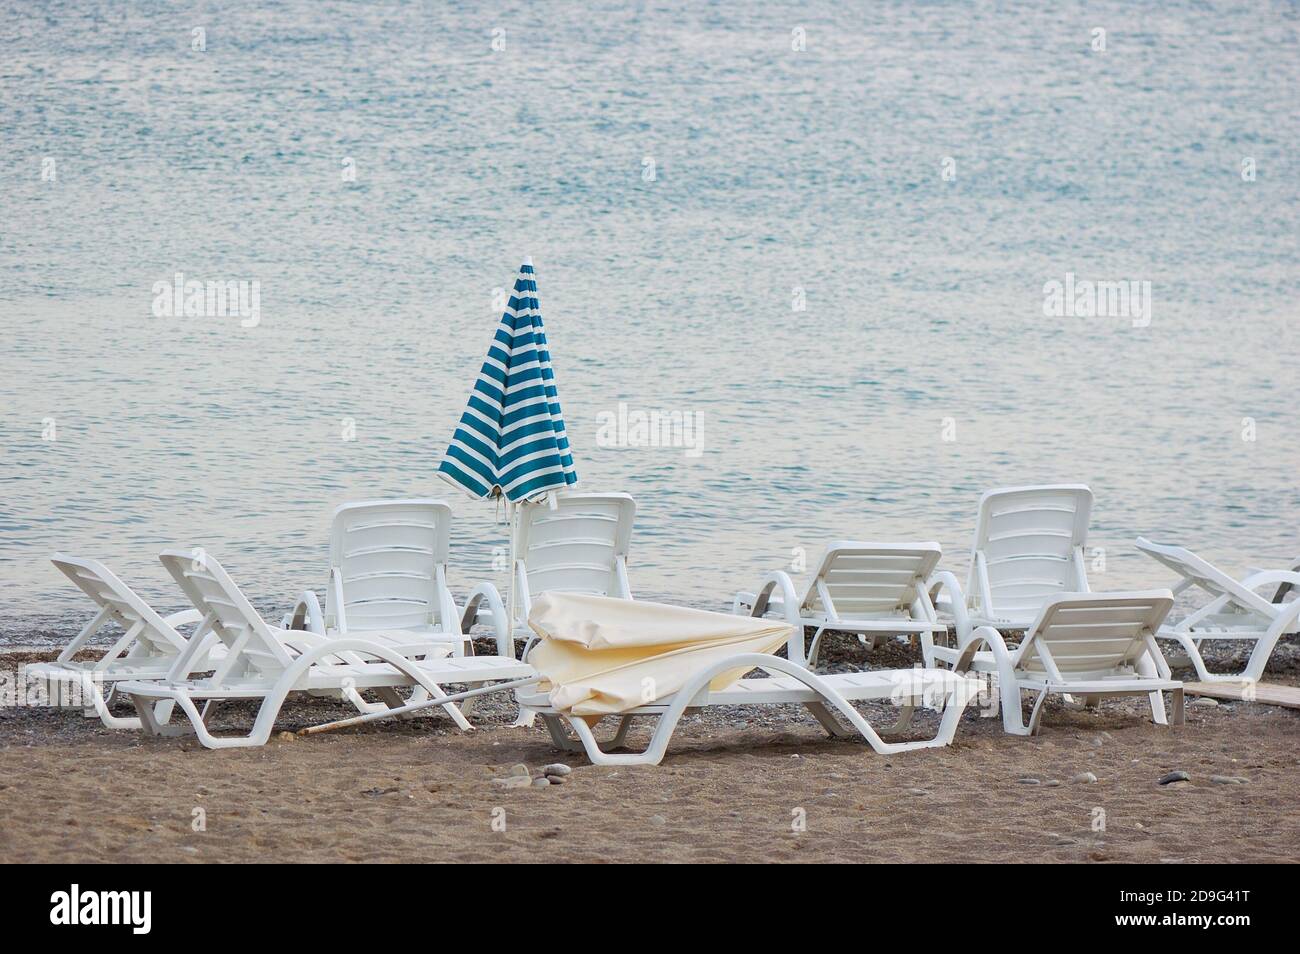 Sea coast with a beach, umbrellas and chaise lounges Stock Photo